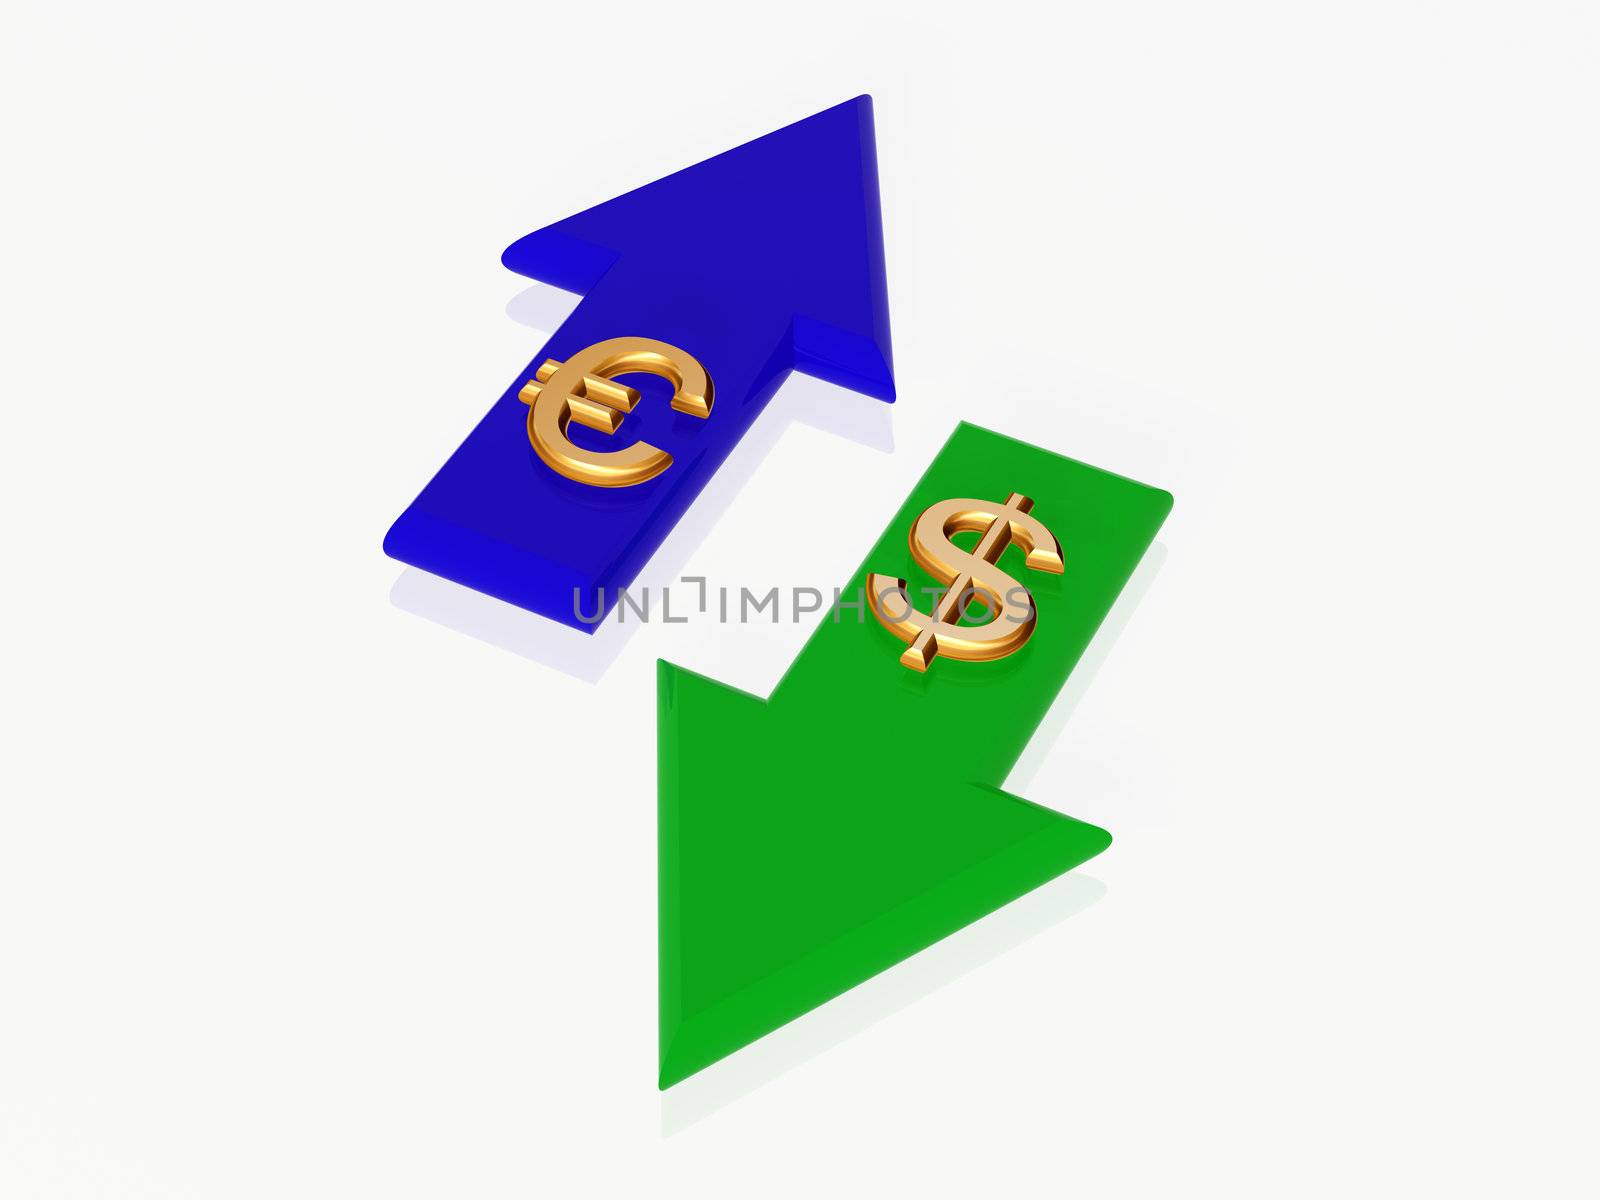 two 3d golden dollar and euro signs with blue and green arrows